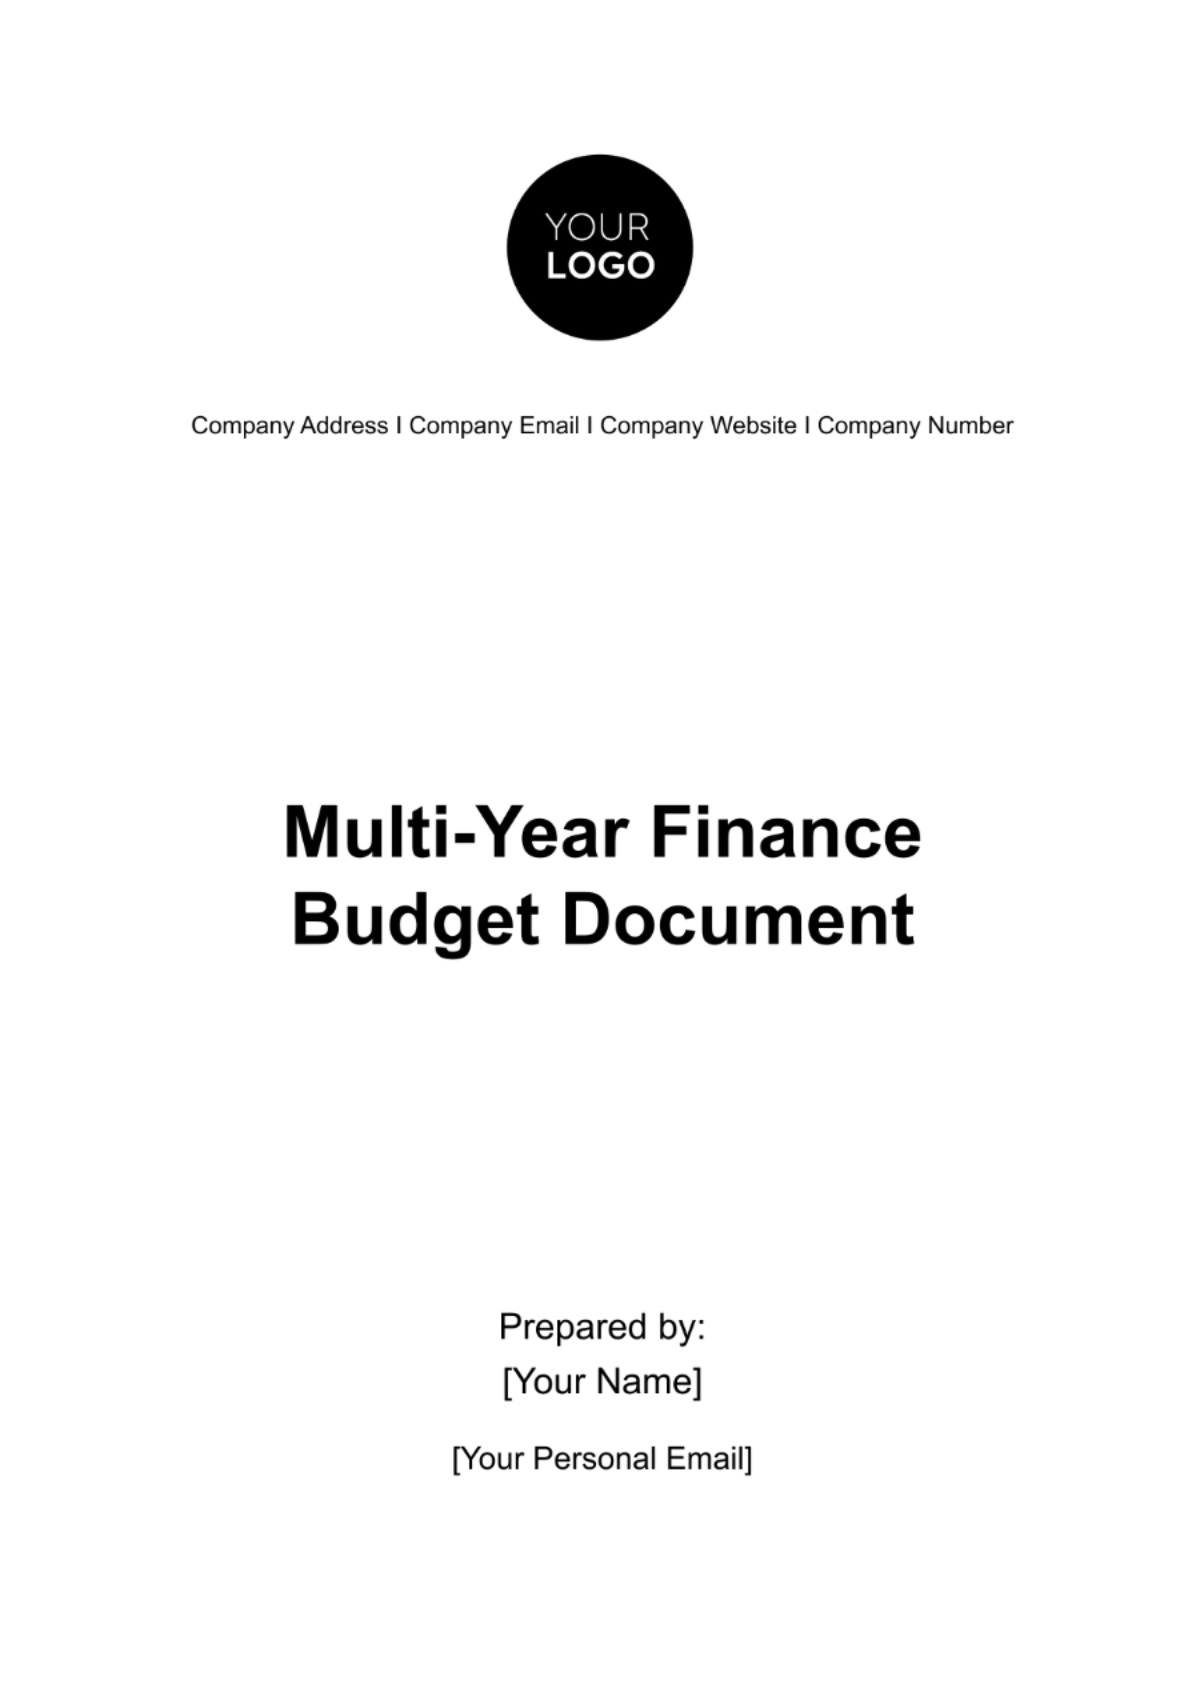 Free Multi-Year Finance Budget Document Template